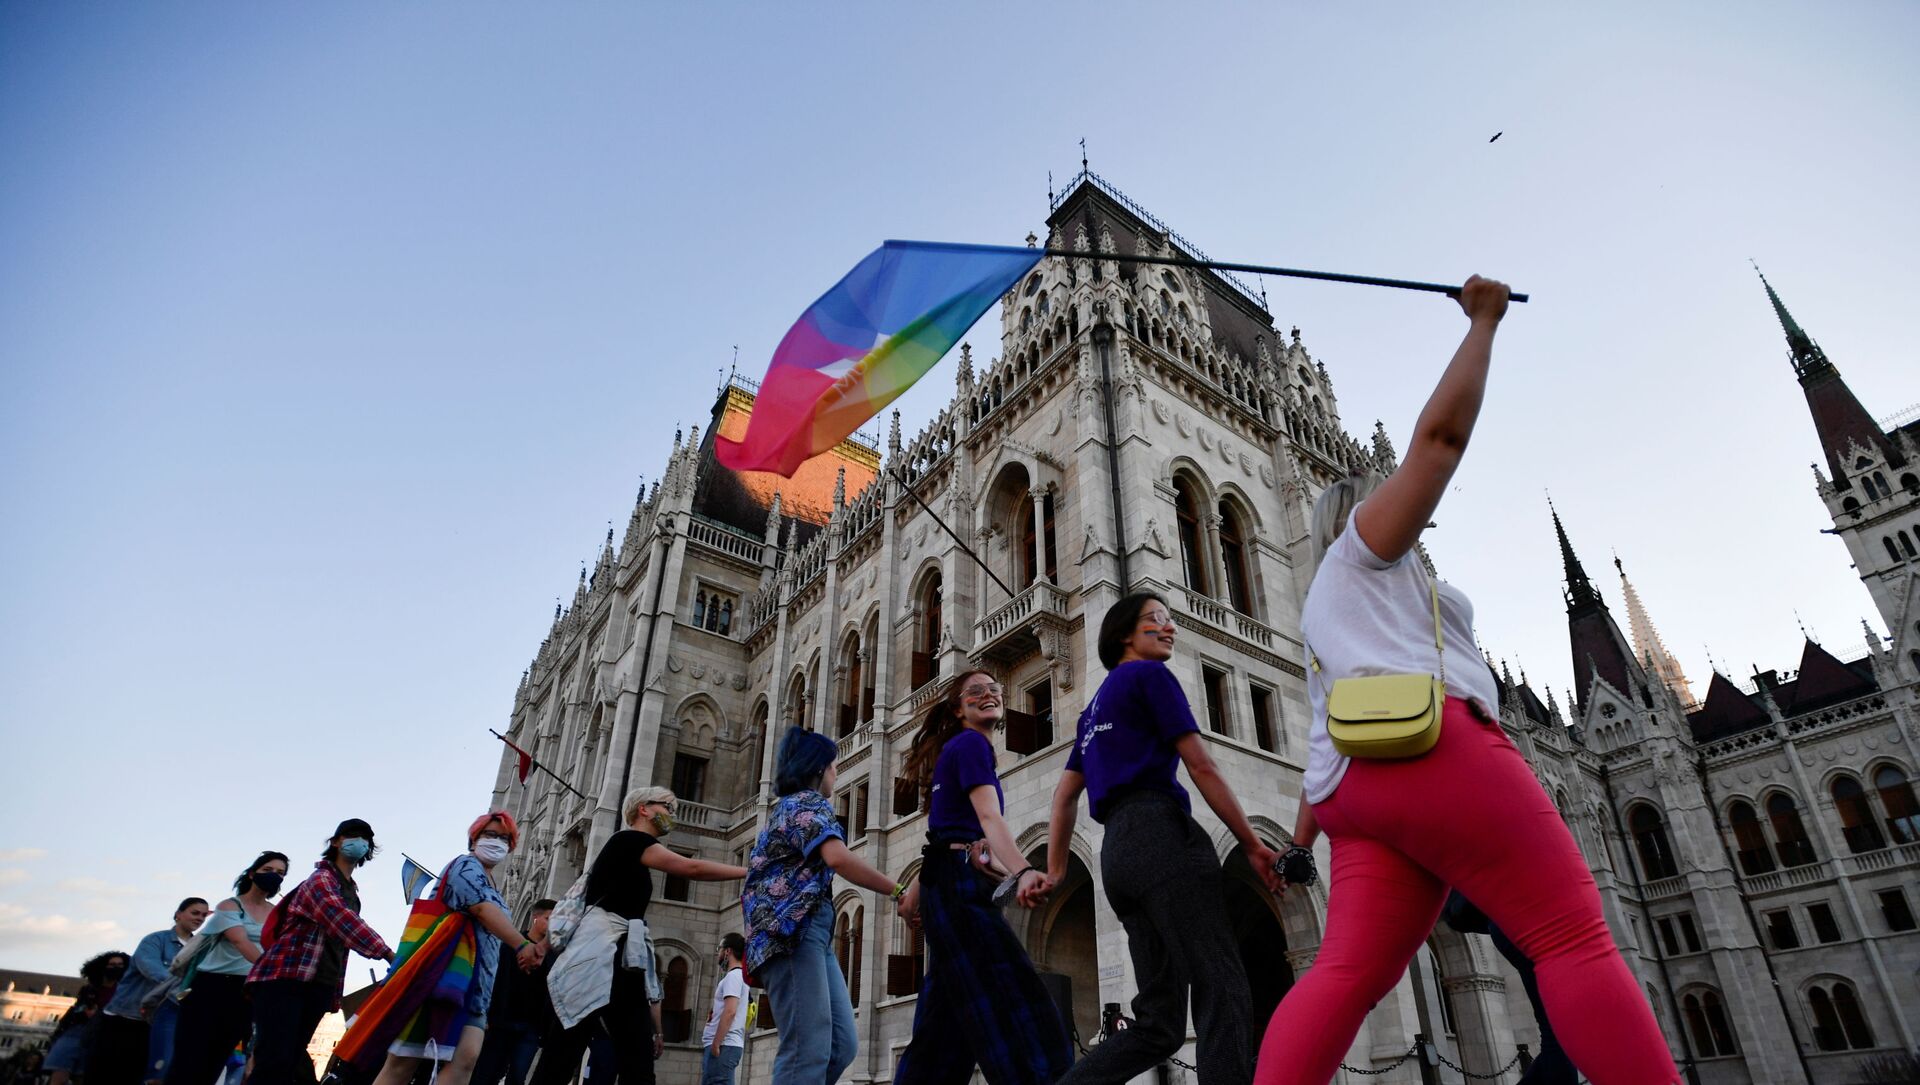 Demonstrators march as they protest against Hungarian Prime Minister Viktor Orban and the latest anti-LGBTQ law in Budapest, Hungary, June 14, 2021 - Sputnik International, 1920, 15.06.2021